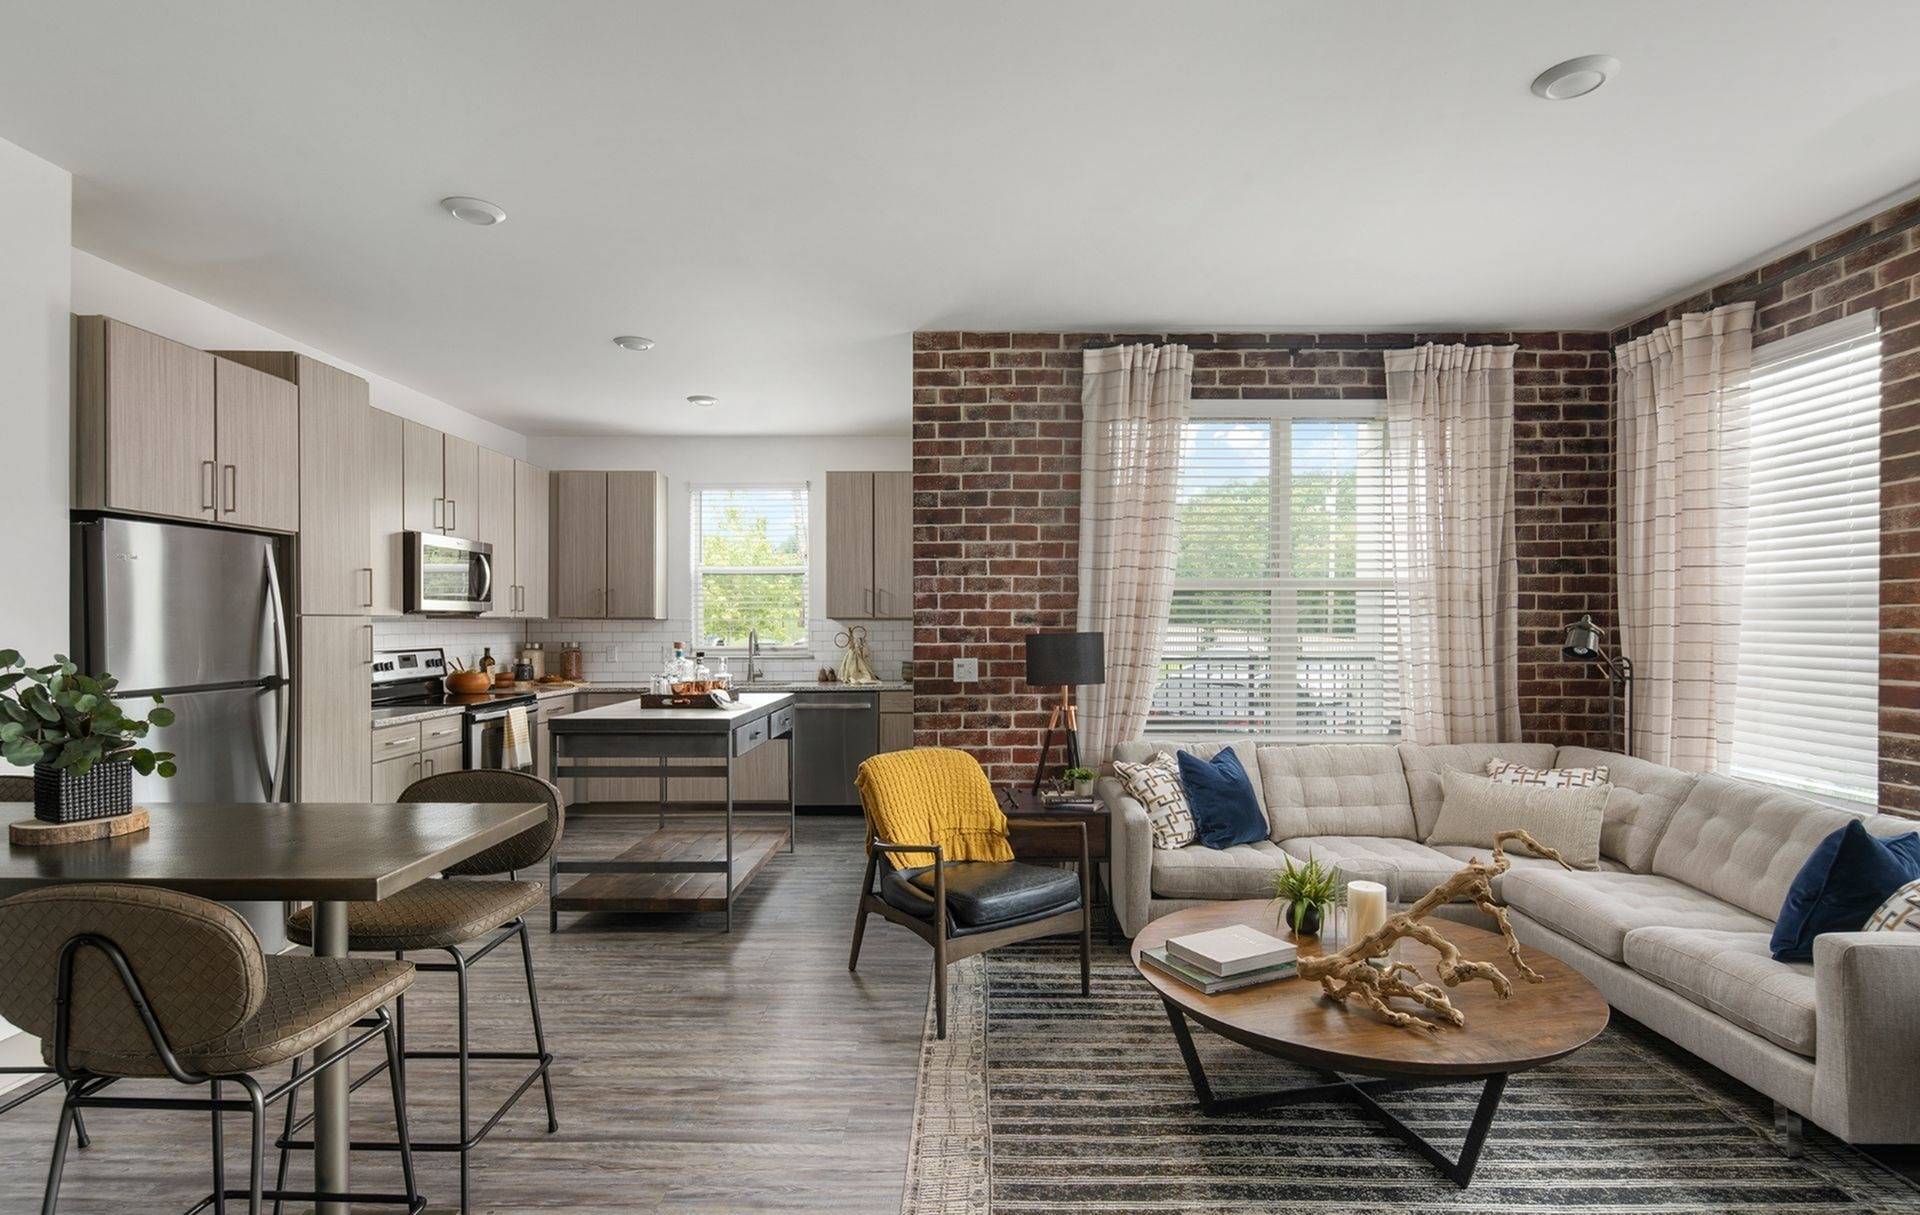 Living Space | Apartments in Nashville, TN | The Anson